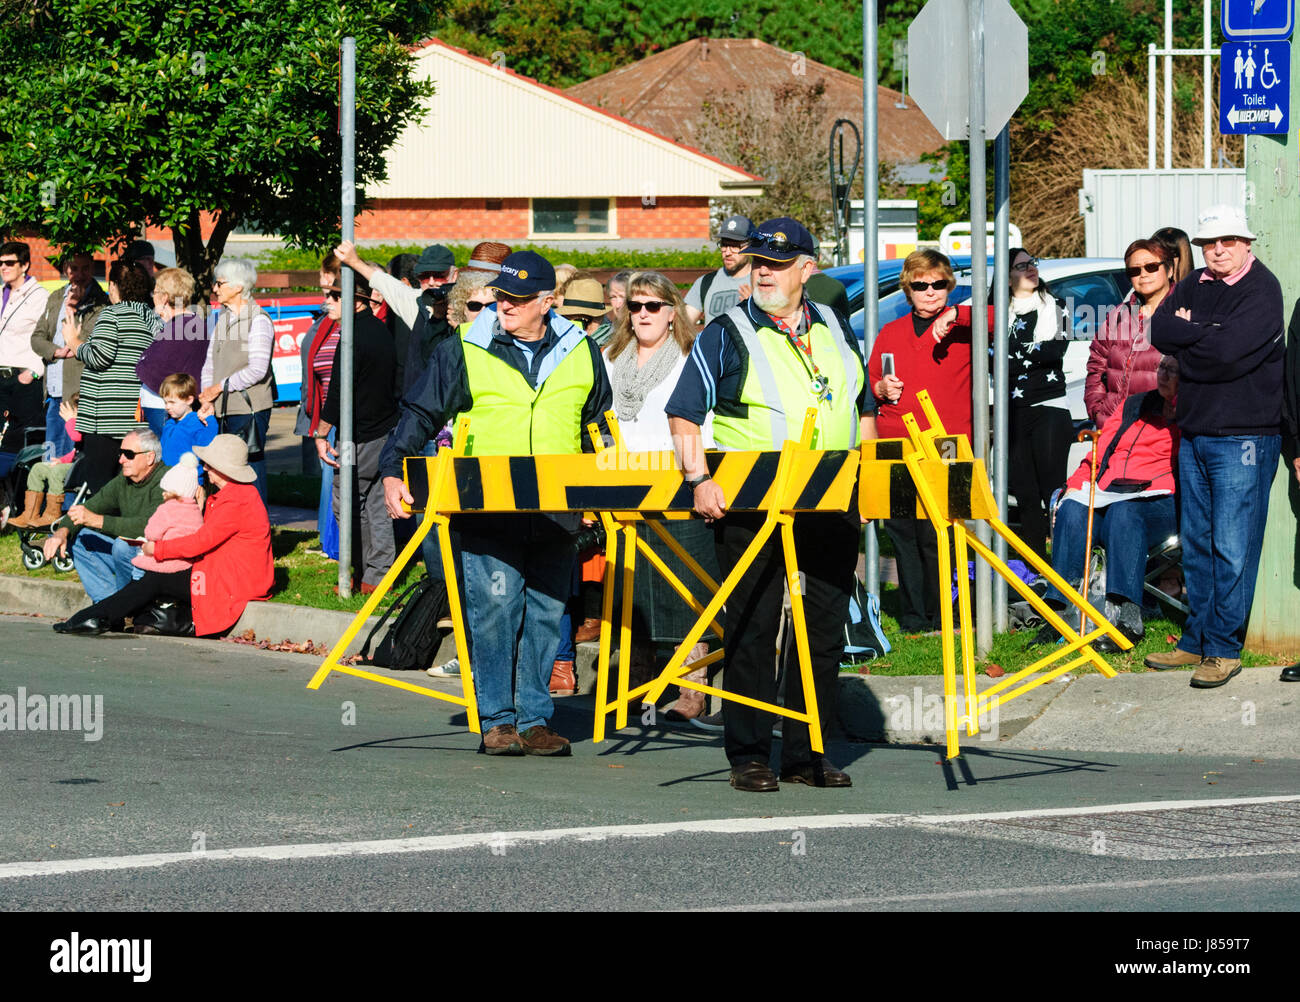 Crowd control operatives wearing hi vis jackets closing off the street during a festival, Berry, New South Wales, NSW, Australia Stock Photo